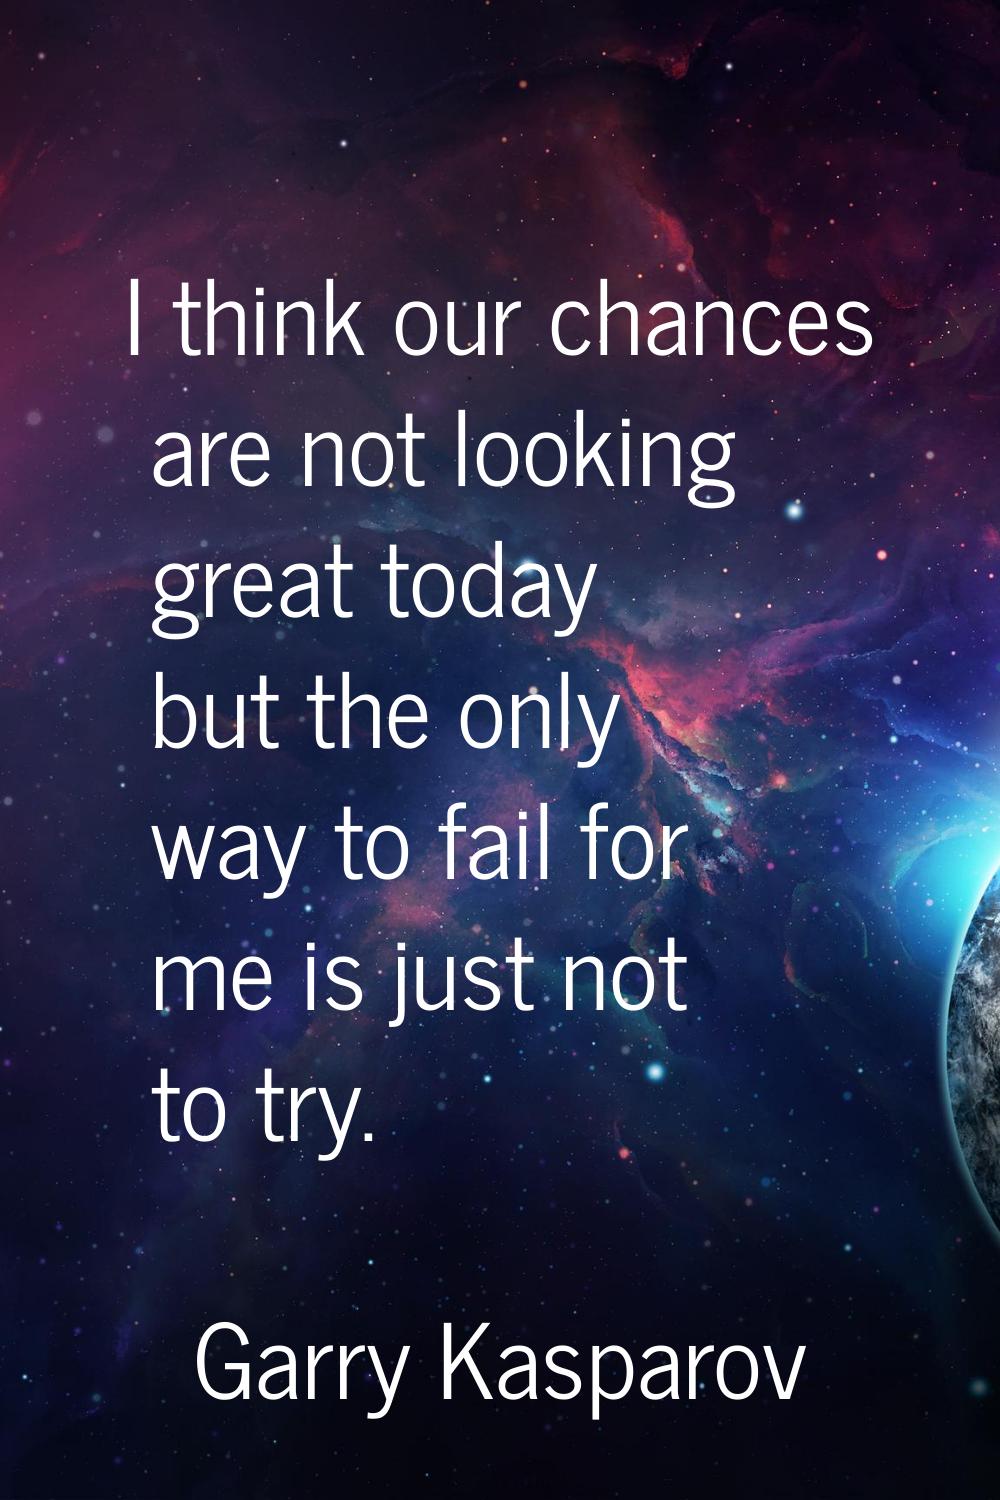 I think our chances are not looking great today but the only way to fail for me is just not to try.